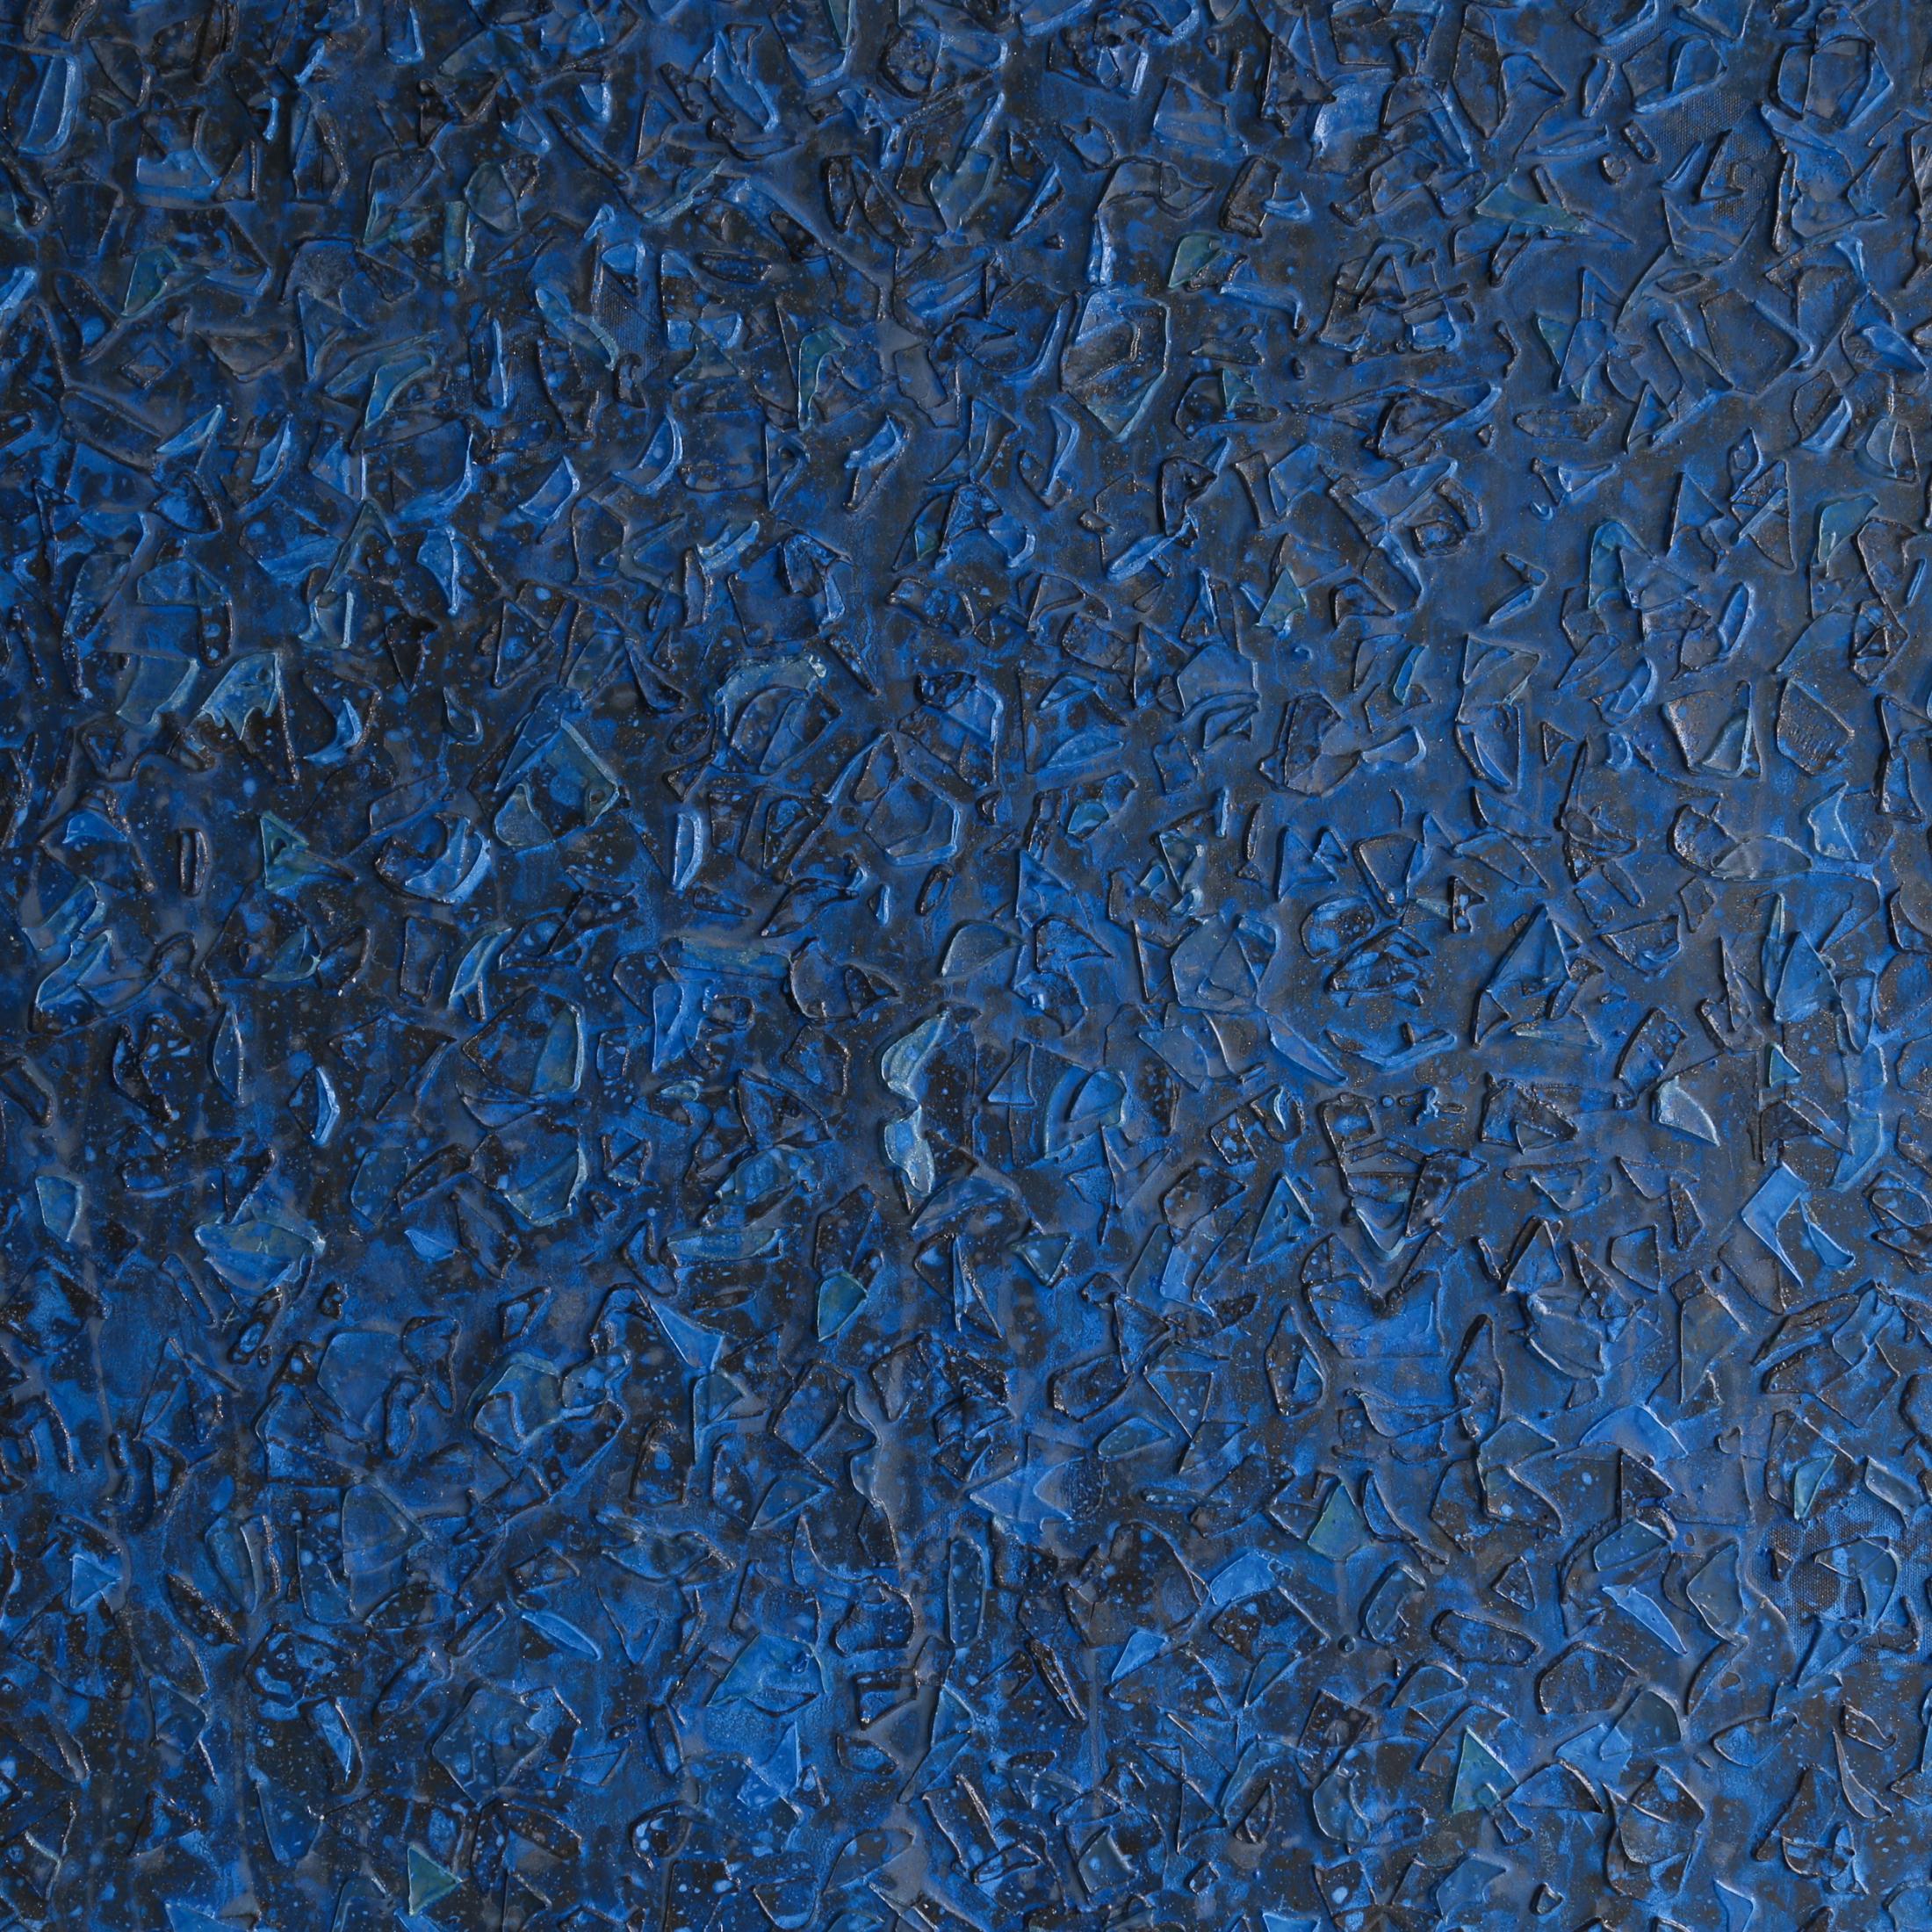 JENNIFER WAGNER
Azure Eve
38.00w x 48.00h x 3.00d in
$2,800.00
With a deep understanding of the mechanics of pigment, transparency, refraction, and finish from her time studying classic car restoration, Jennifer Wagner creates prismatic depth in her